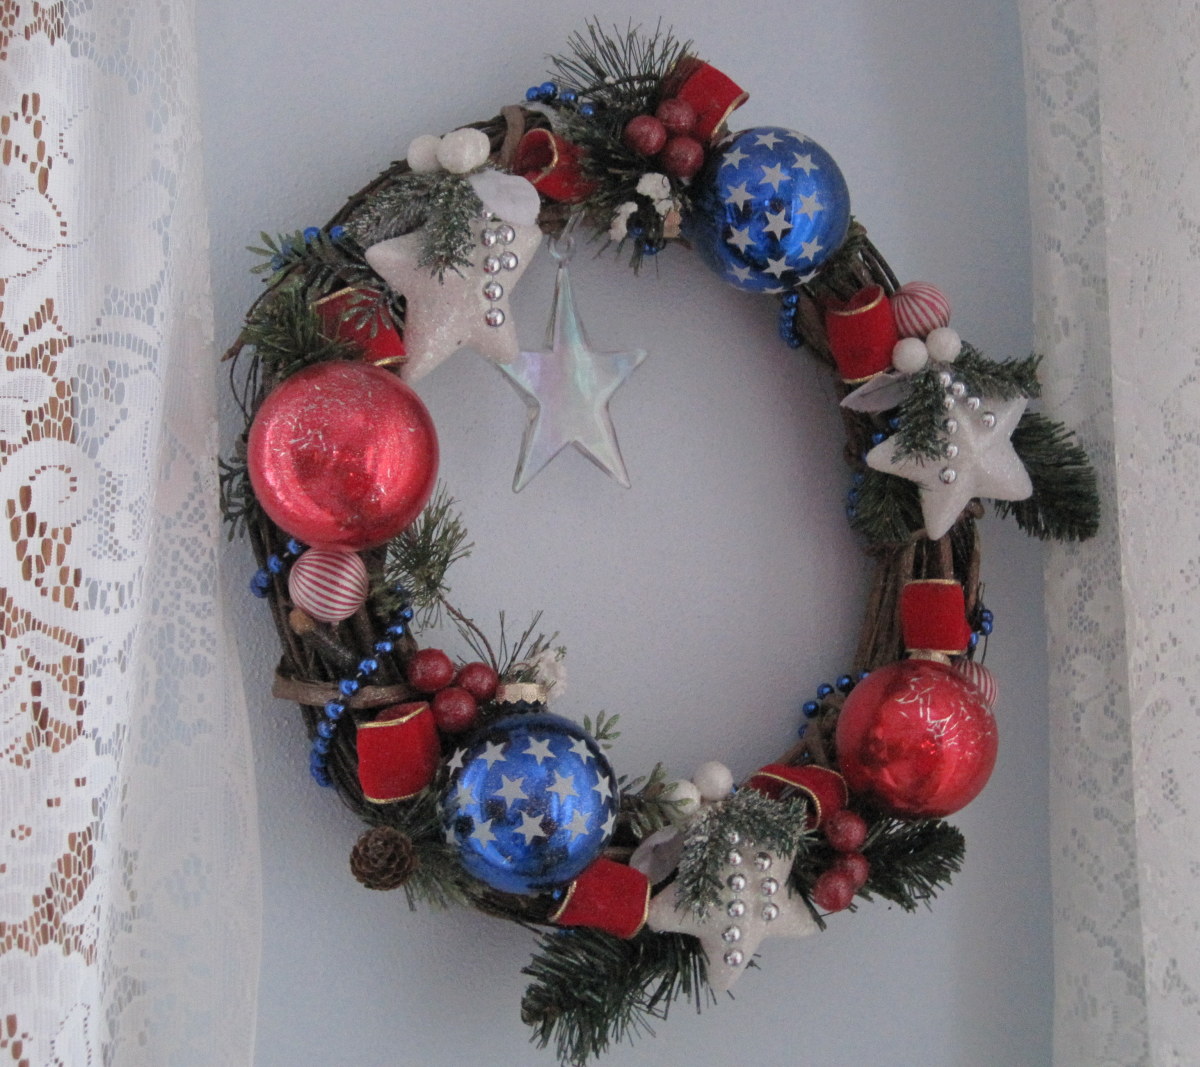 Red, White and Blue Patriotic Holiday Wreath